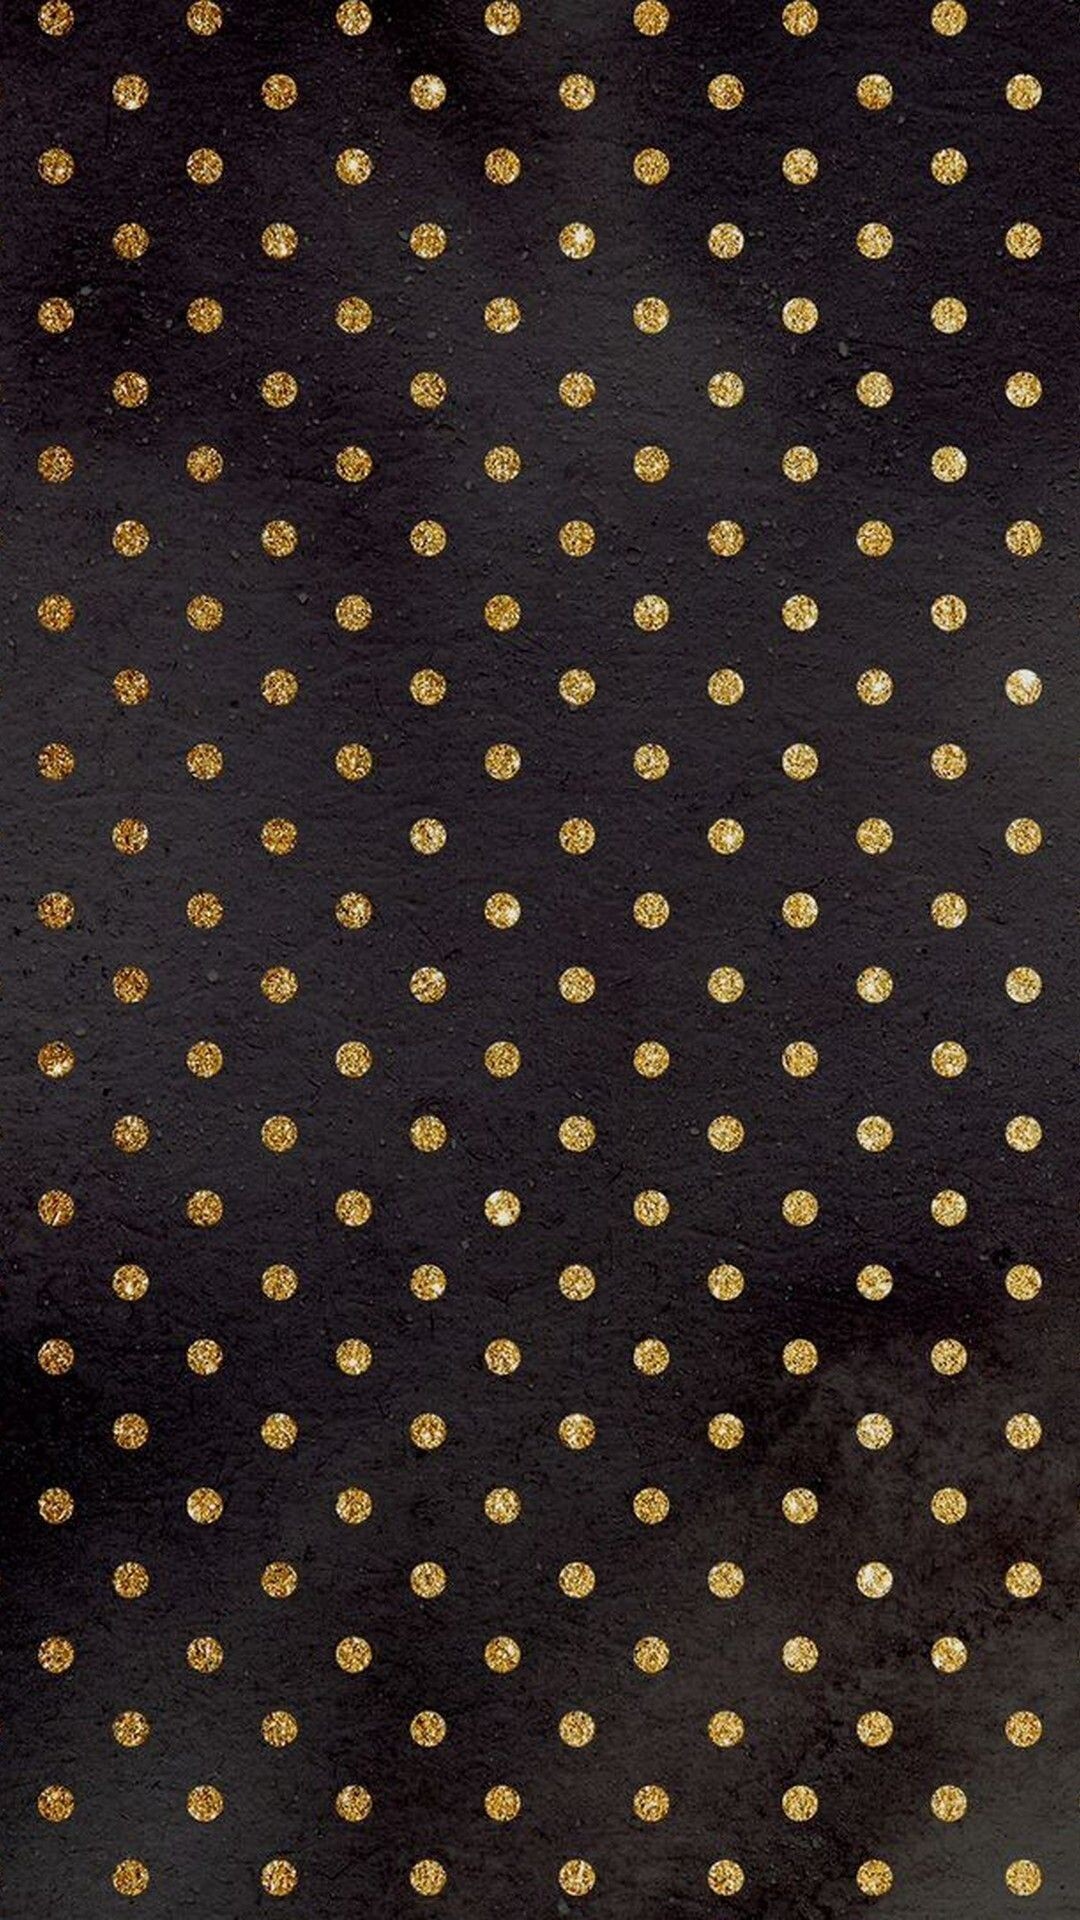 Gold Dots: Golden spots on the black velvet background, Diagonal repeat layout, Circles. 1080x1920 Full HD Background.